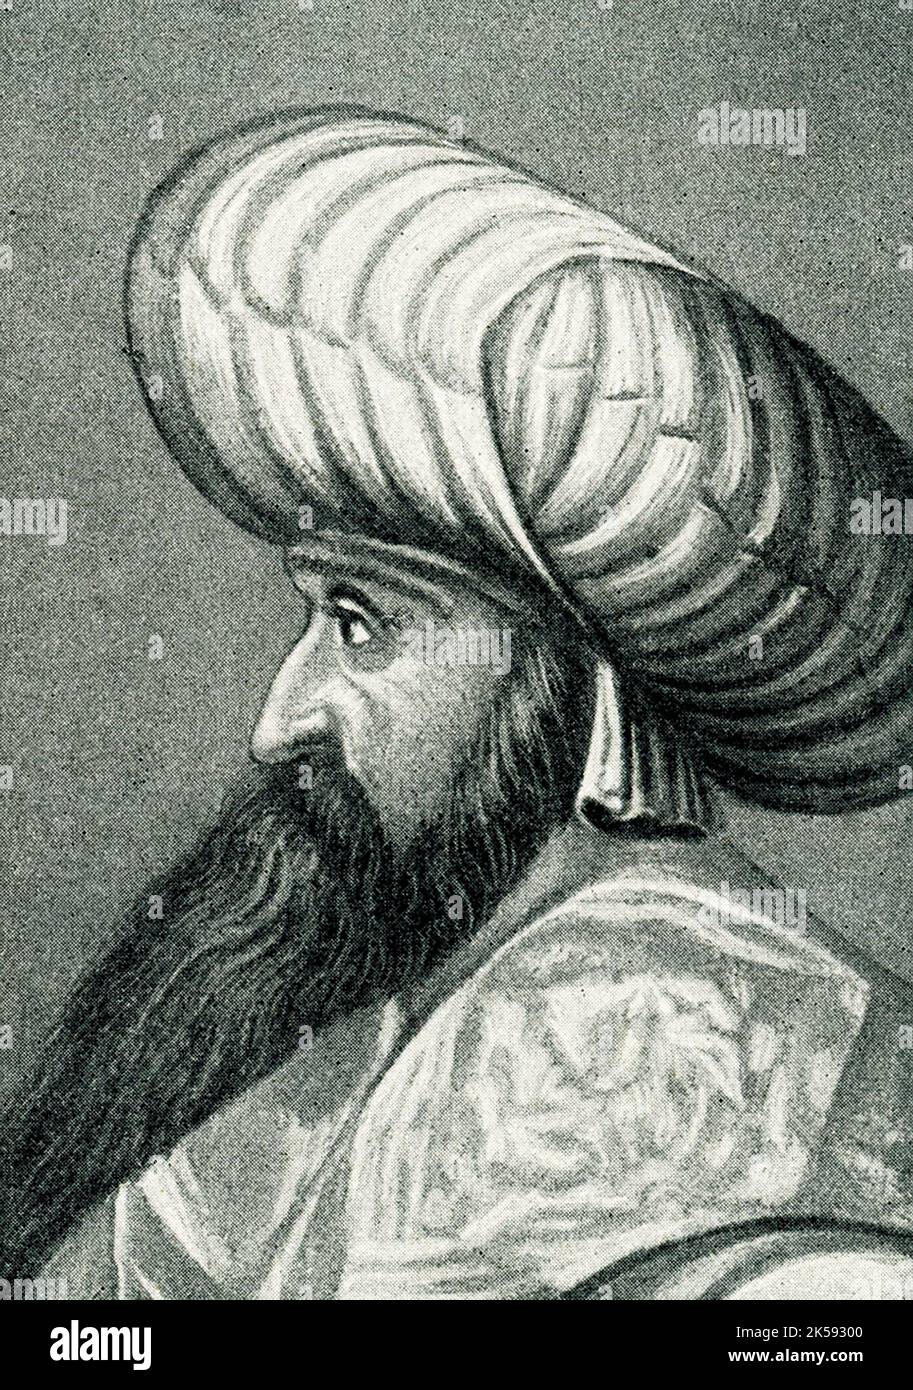 The caption for this 1910 image reads: “Sultan Bayezid I.” Bayezid I, byname Yildirim —also known as The Thunderbolt was (born c. 1360 and died 1403. The Ottoman sultan in 1389–1402, he founded the first centralized Ottoman state based on traditional Turkish and Muslim institutions and stressed the need to extend Ottoman dominion in Anatolia. This painting is in a collection in the Tyrol (also Tirol) in Austria. Stock Photo